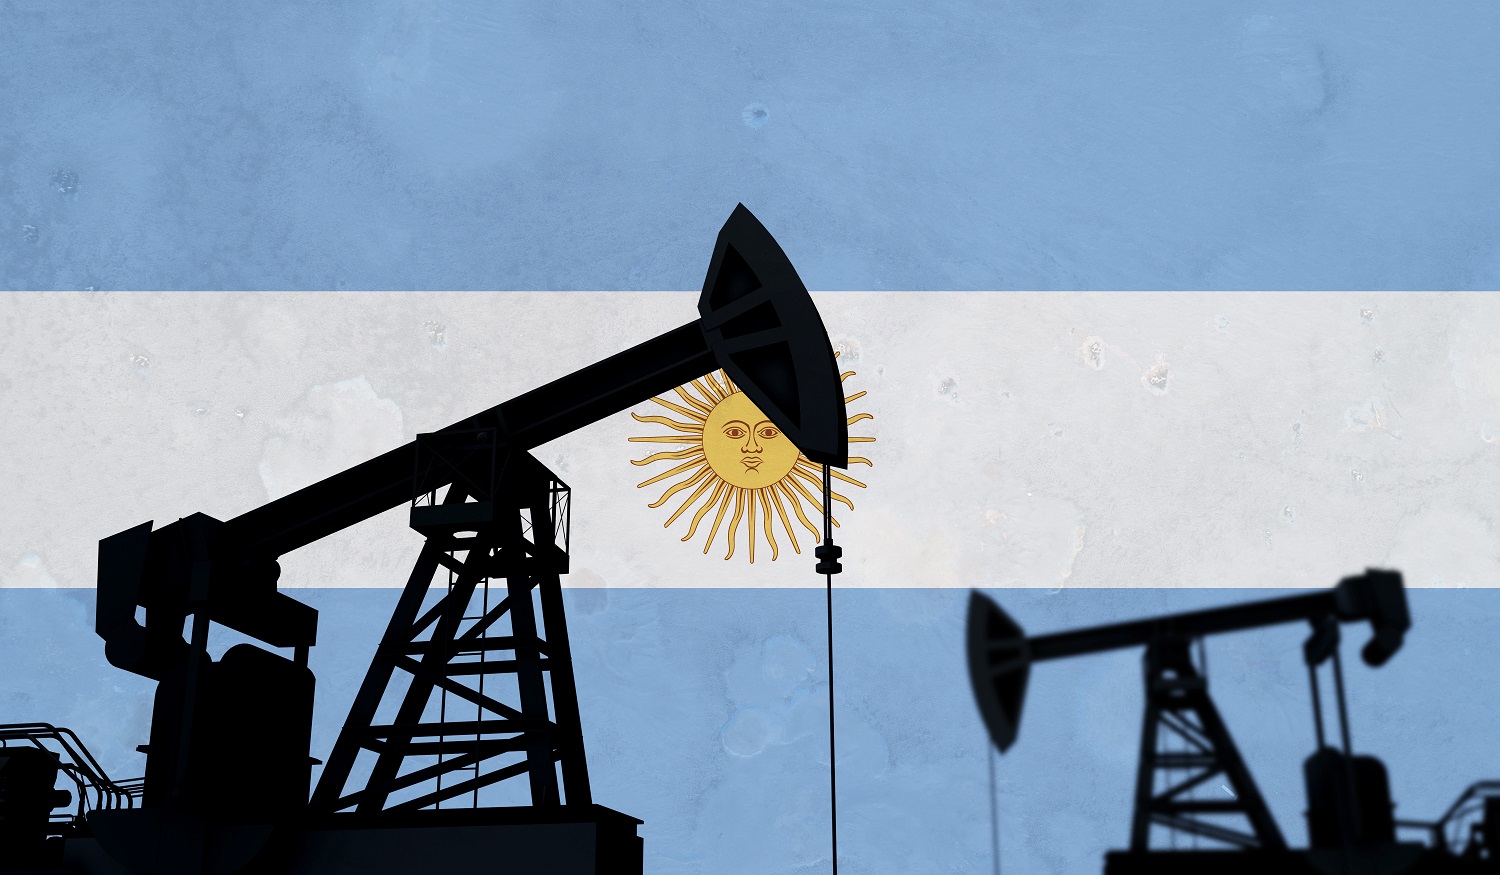 Oil pump silhouettes against the backdrop of the Argentinian flag.